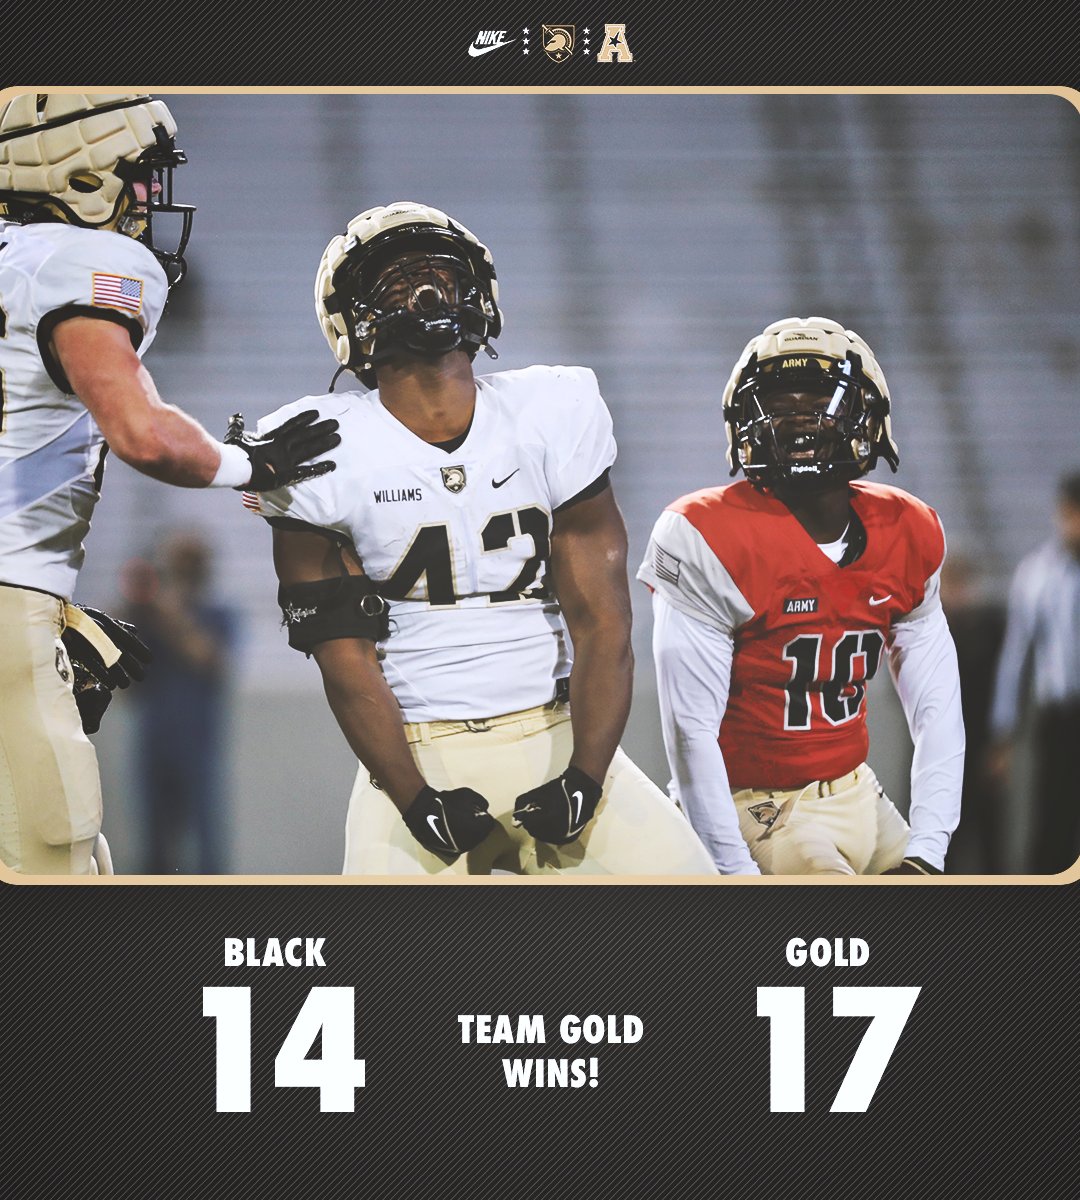 TEAM GOLD WINS! Gold comes from behind to take the Black & Gold Spring Game! #FridayKnightLights